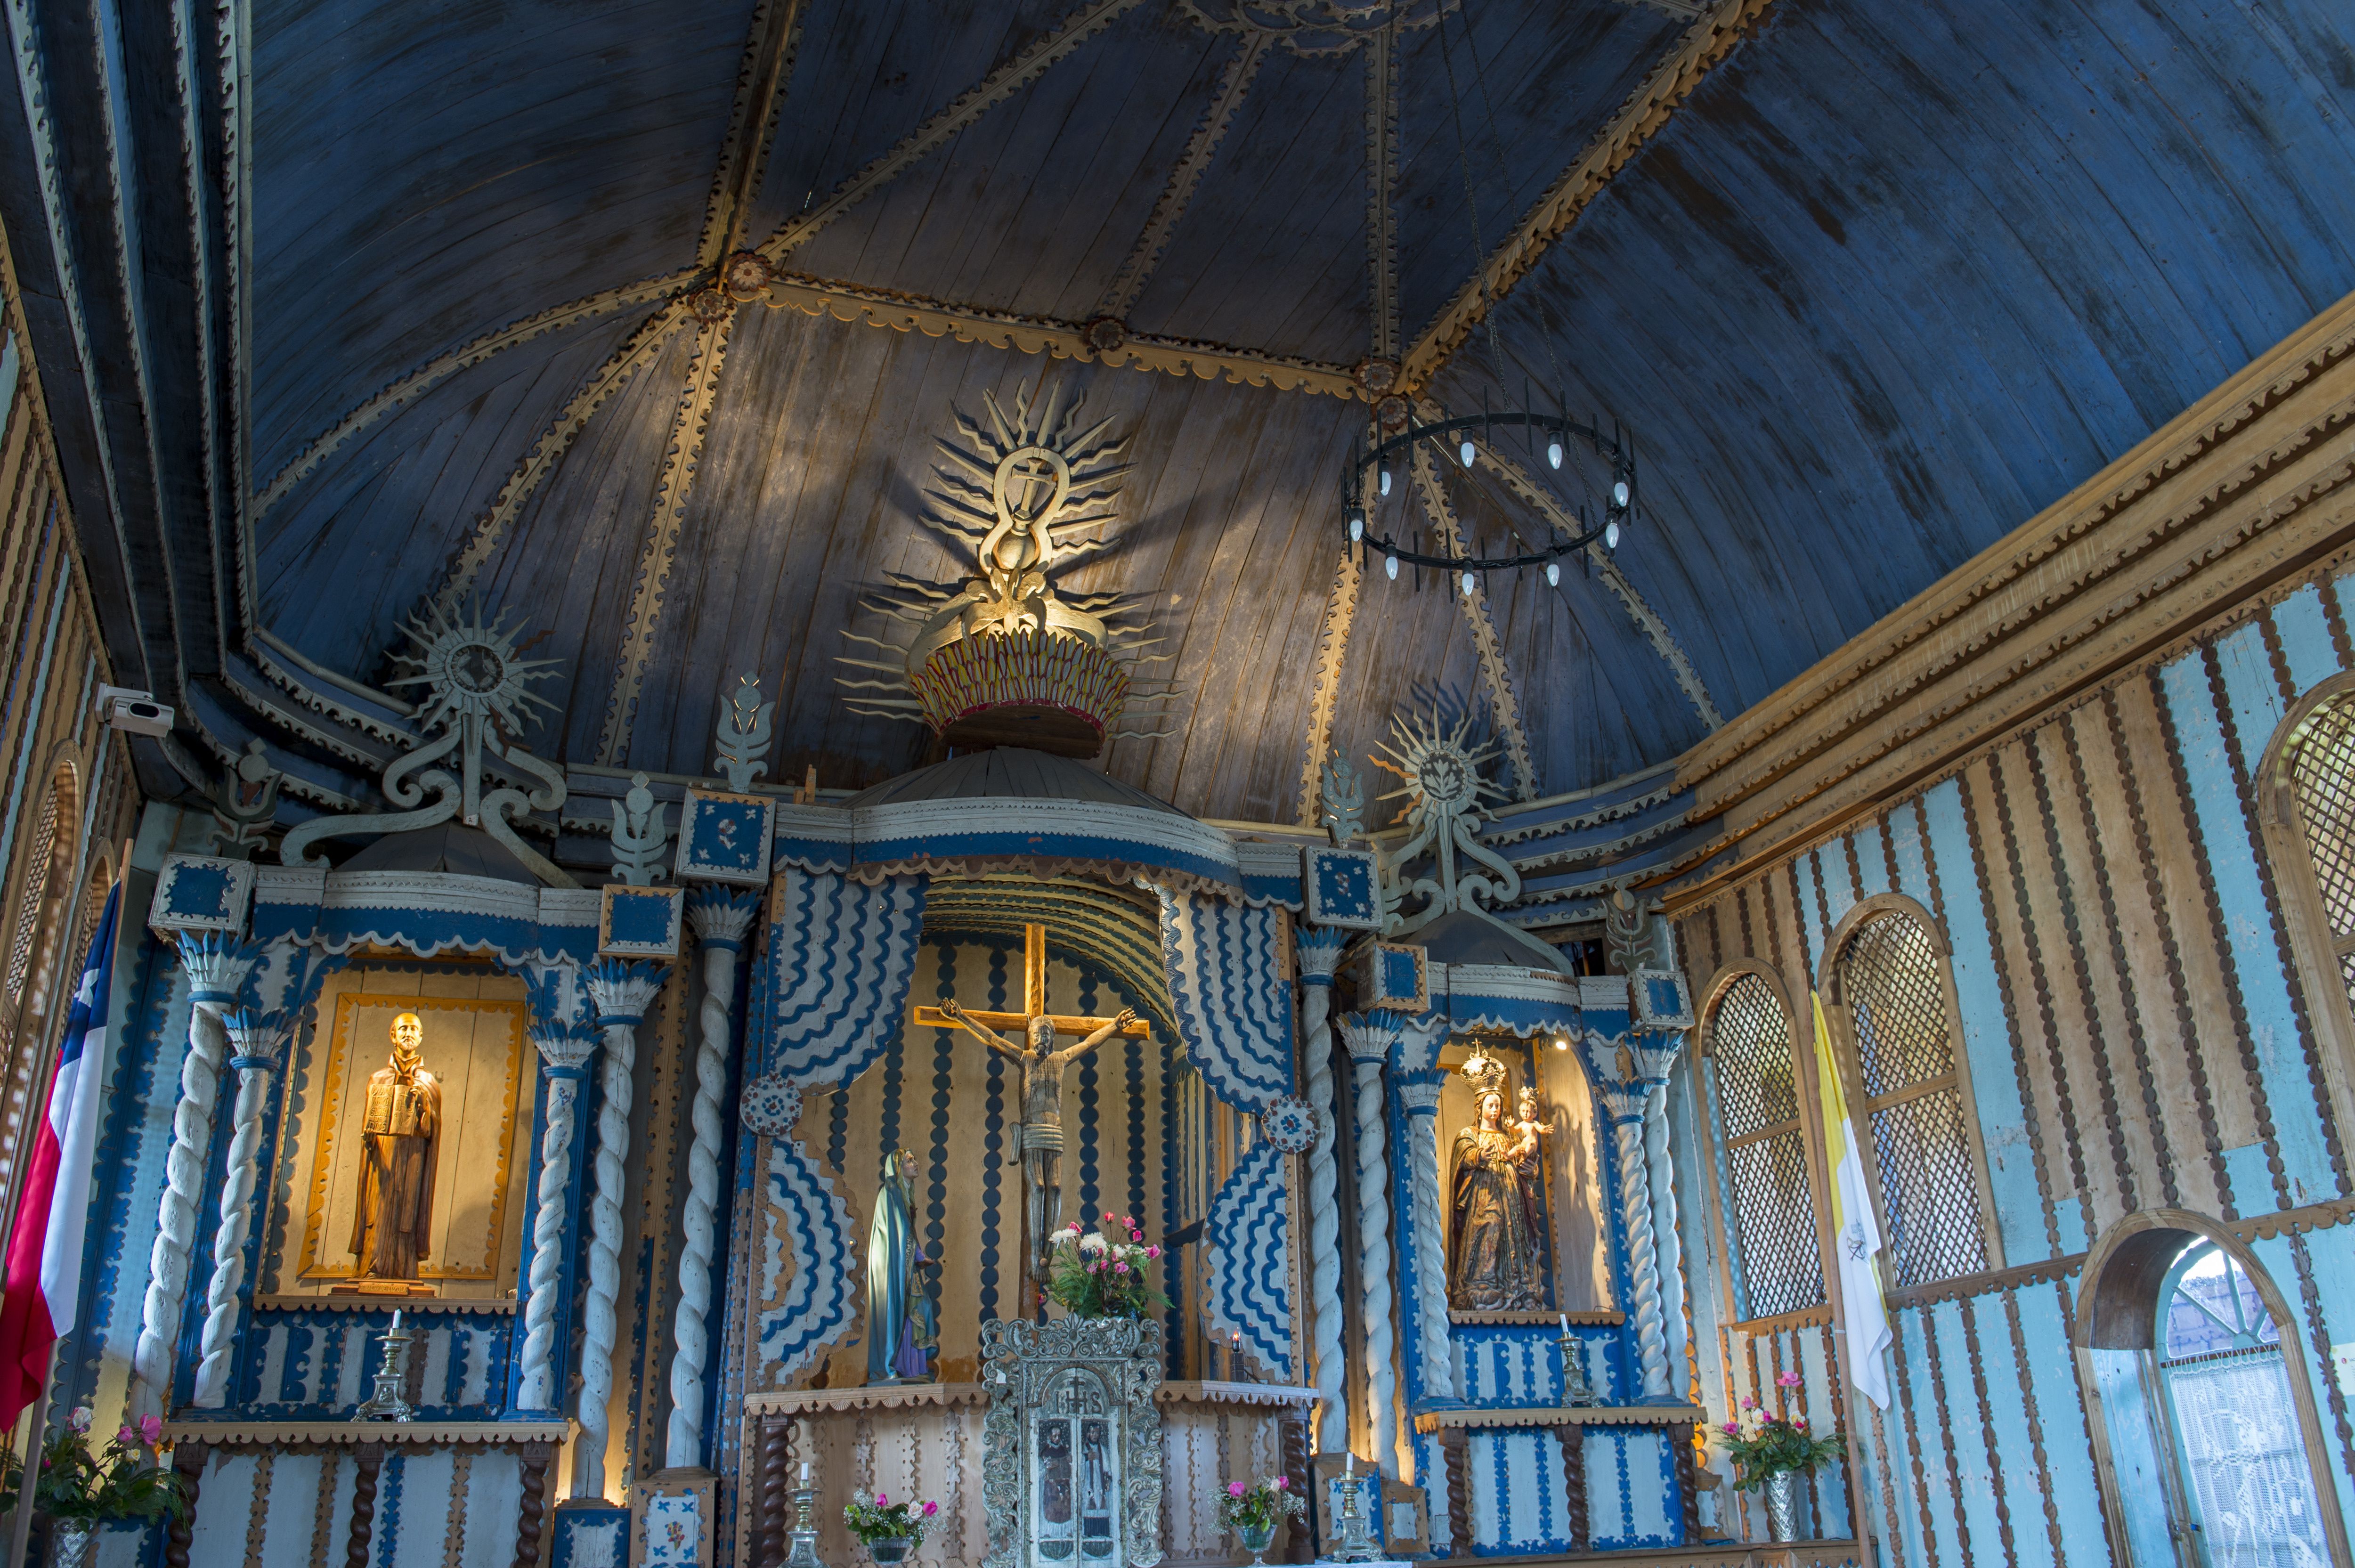 View of the altar of the wooden Church of Santa María de Loreto de Achao (built in 1730), a UNESCO World Heritage Site, in Achao on the island of Quinchao, Chiloe Island, Chile.